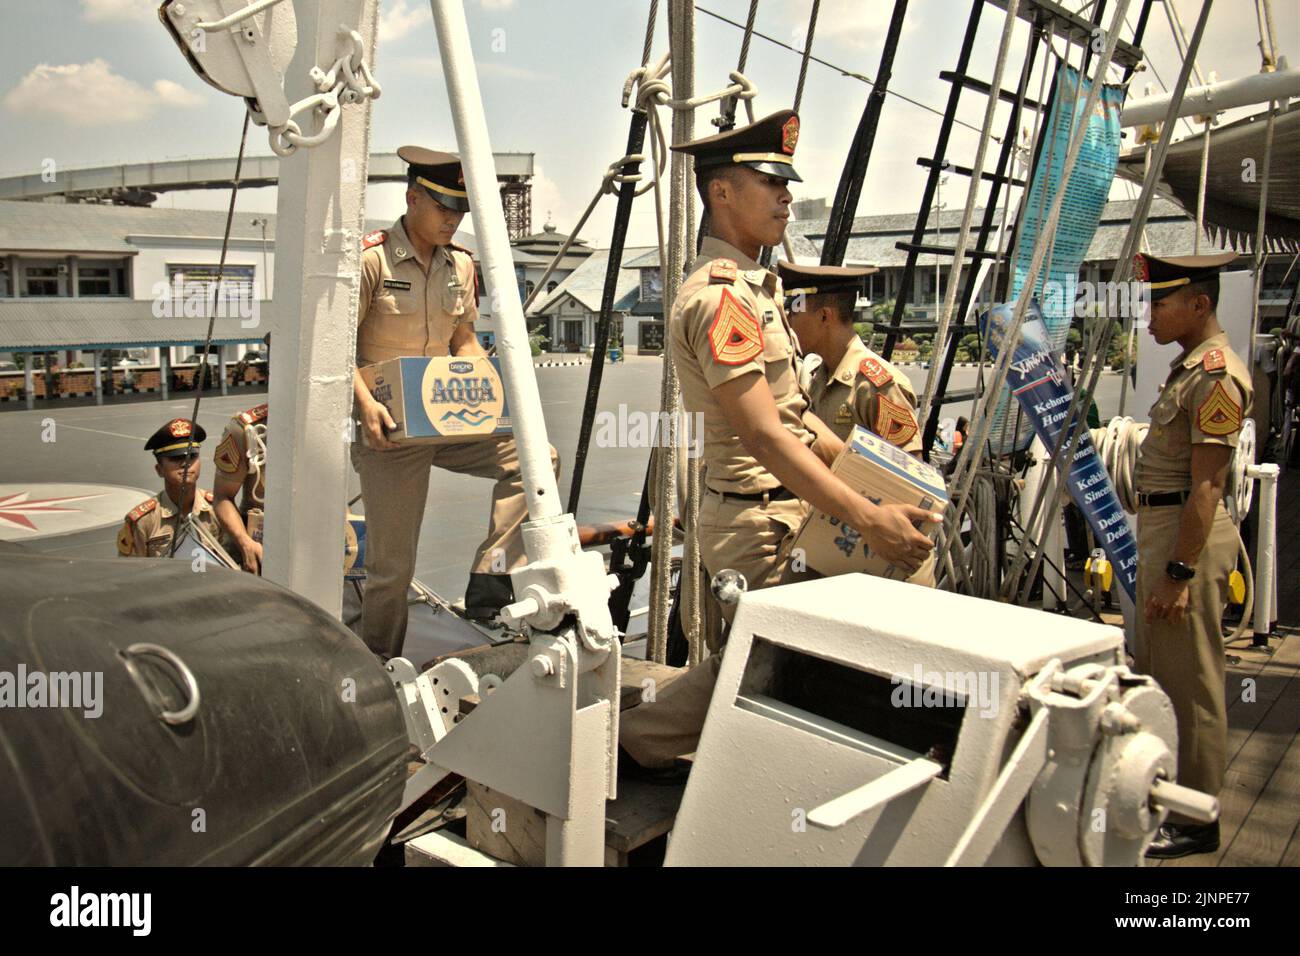 Navy cadets carrying mineral water in boxes as they are about to enter the cadet room on KRI Dewaruci (Dewa Ruci), an Indonesian tall ship, as the barquentine type schooner is opened for public visitors at Kolinlamil harbour (Navy harbour) in Tanjung Priok, North Jakarta, Jakarta, Indonesia. Stock Photo